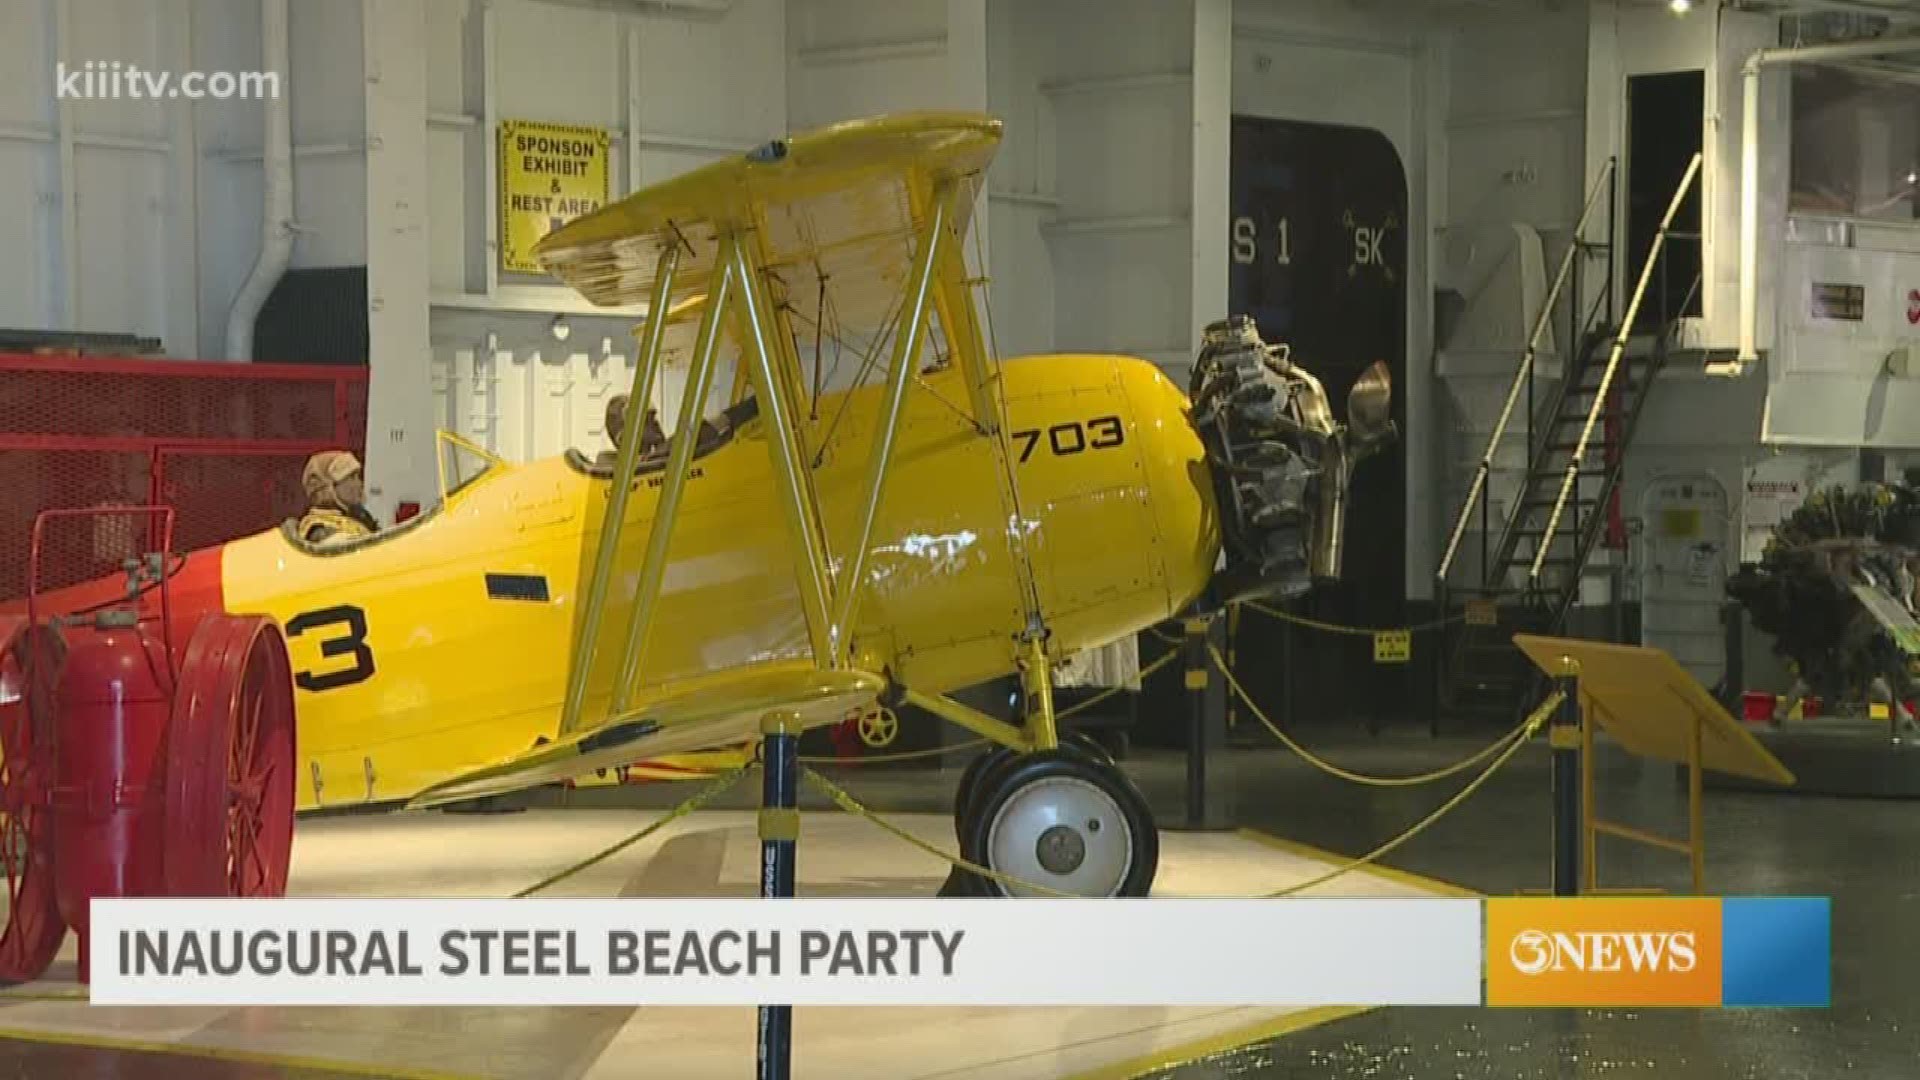 The USS Lexington will host the first ever Steel Beach Party Saturday June, 22nd.